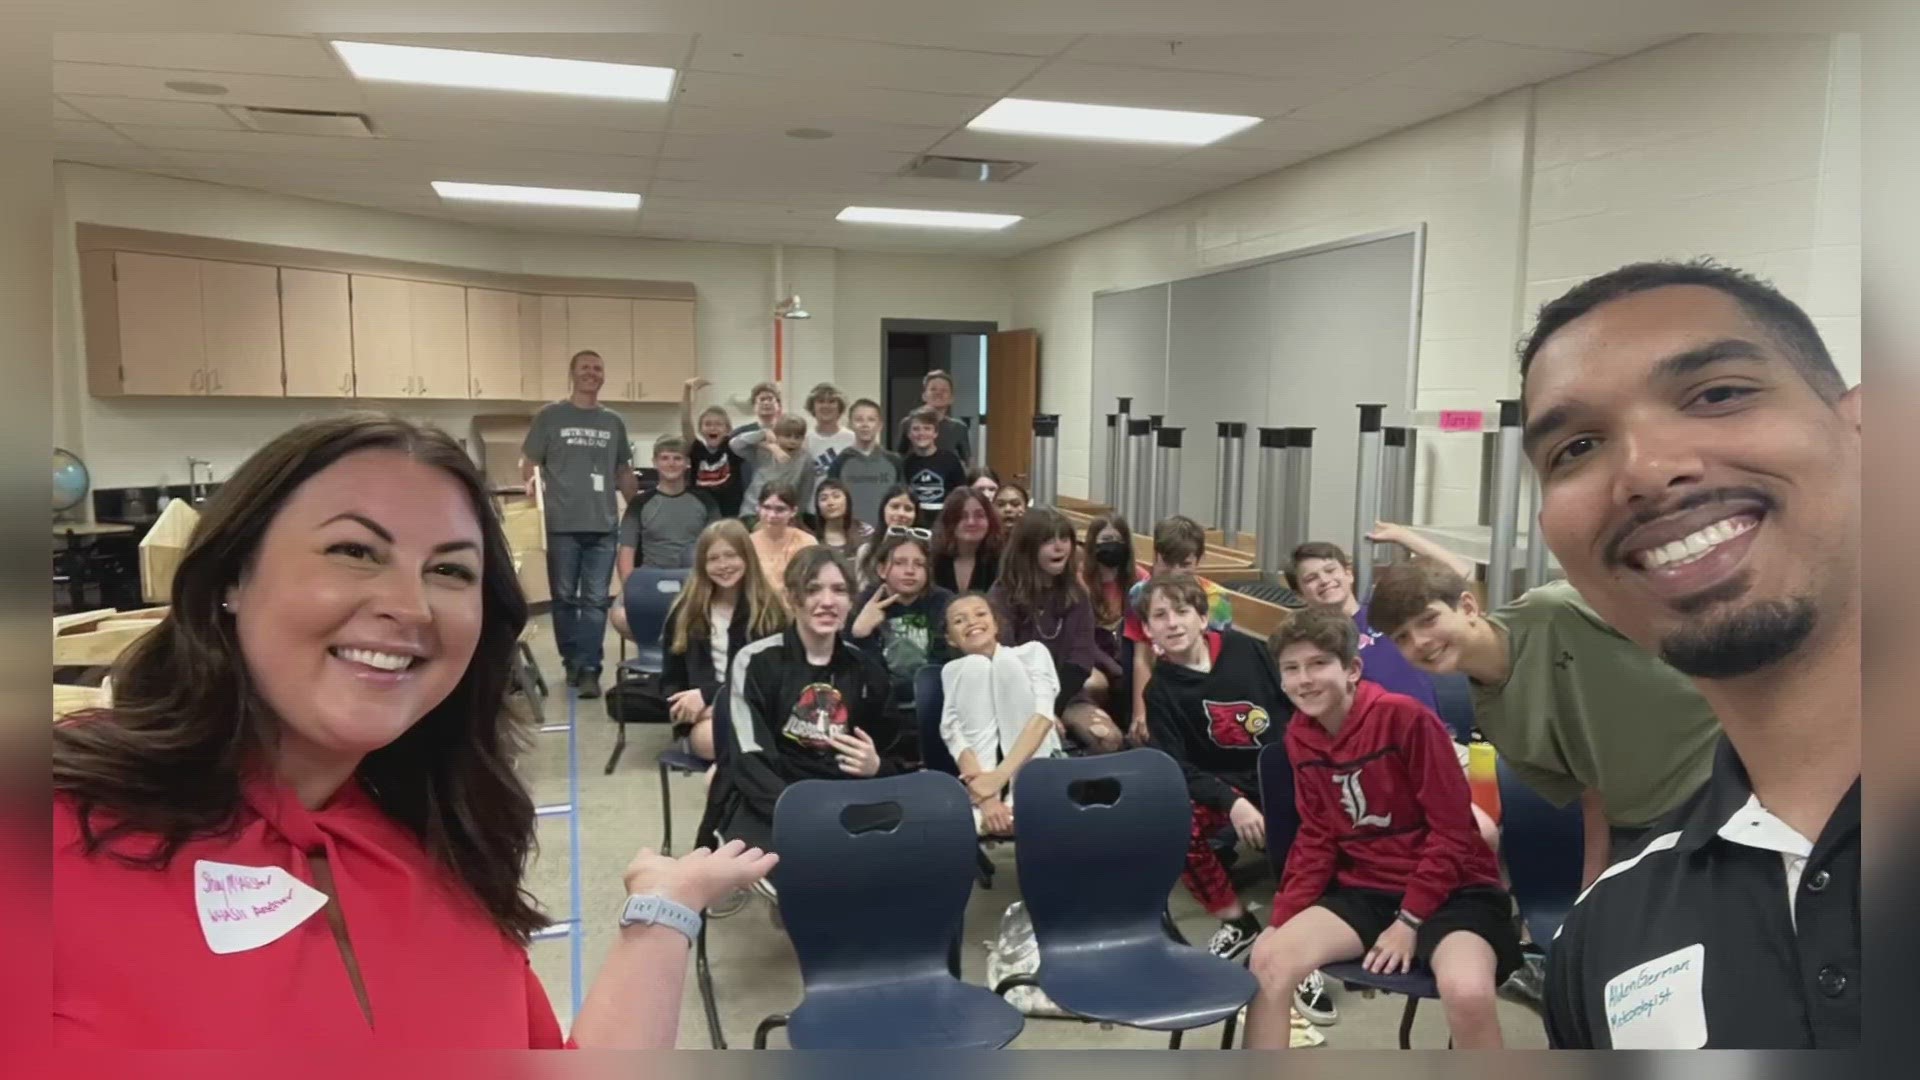 They answered all kinds of questions from the curious sixth-grade class!